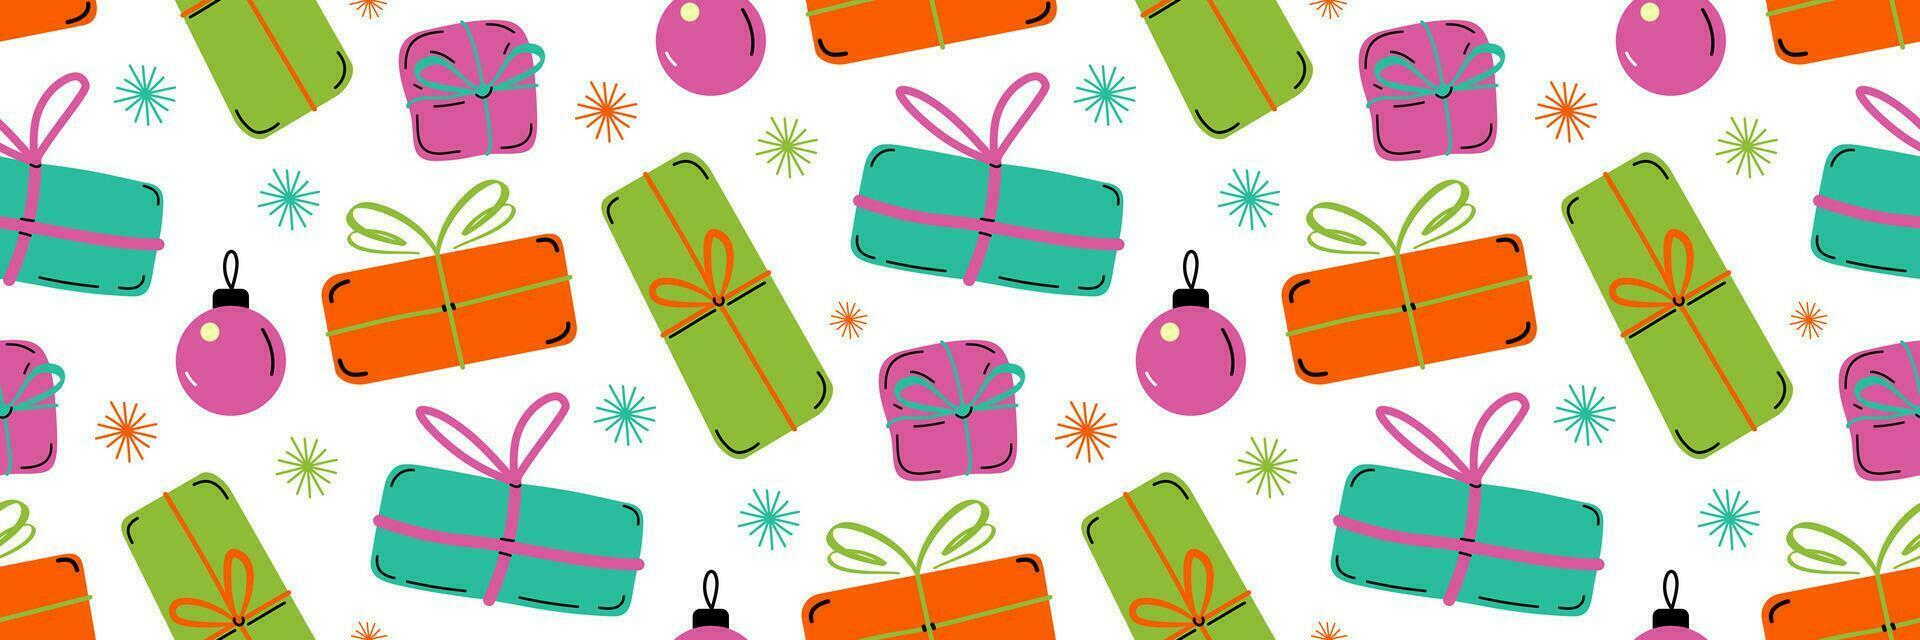 Christmas and new year gifts seamless pattern. Merry and Bright Rainbow Hues elements. Holiday paper, printing on wrapping paper, wallpaper or fabric. Hand drawn vector illustration.